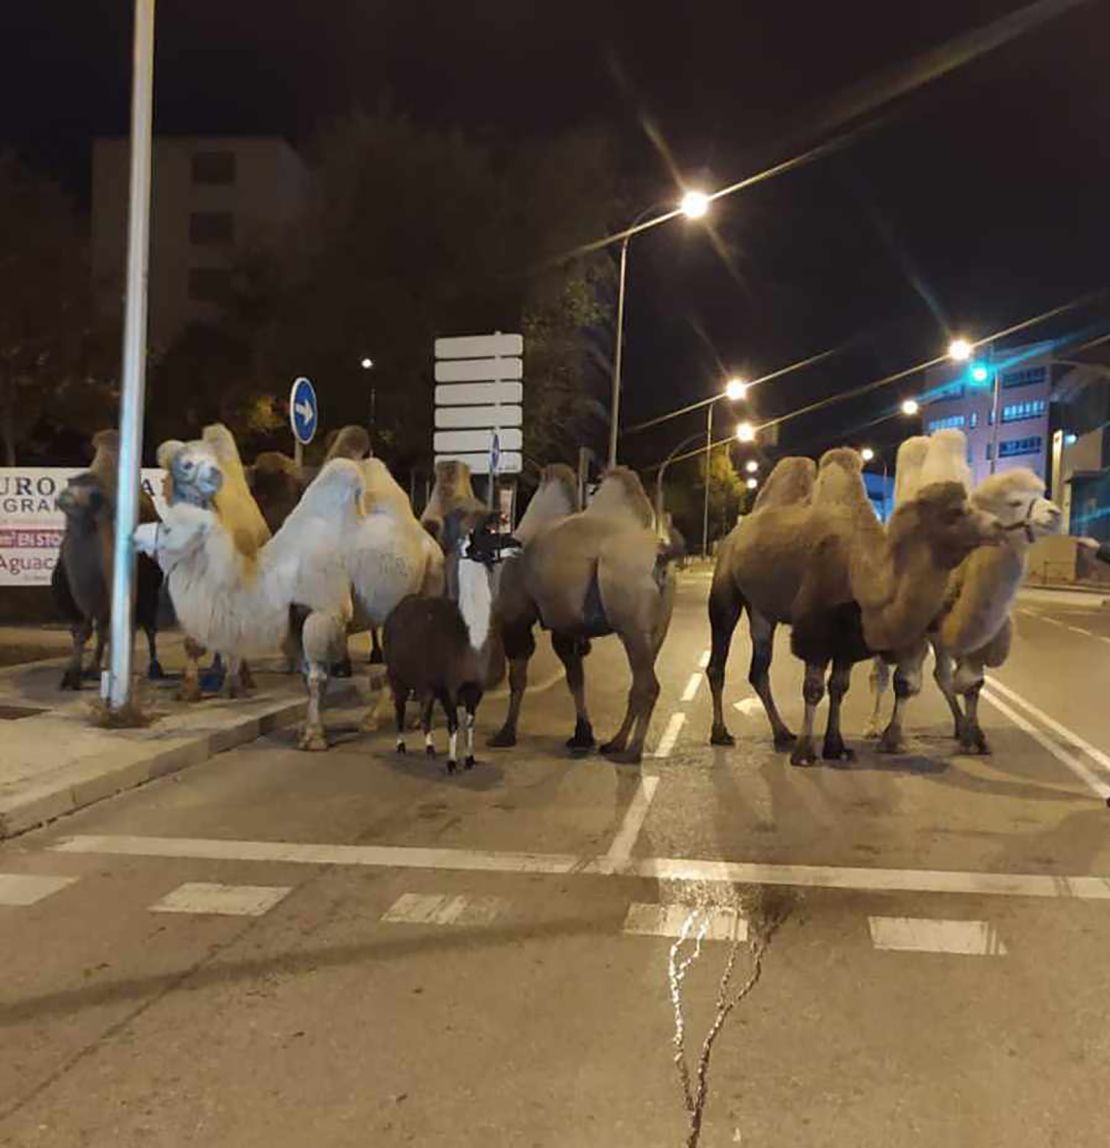 The escaped camels are pictured exploring the Madrid streets on Friday night 